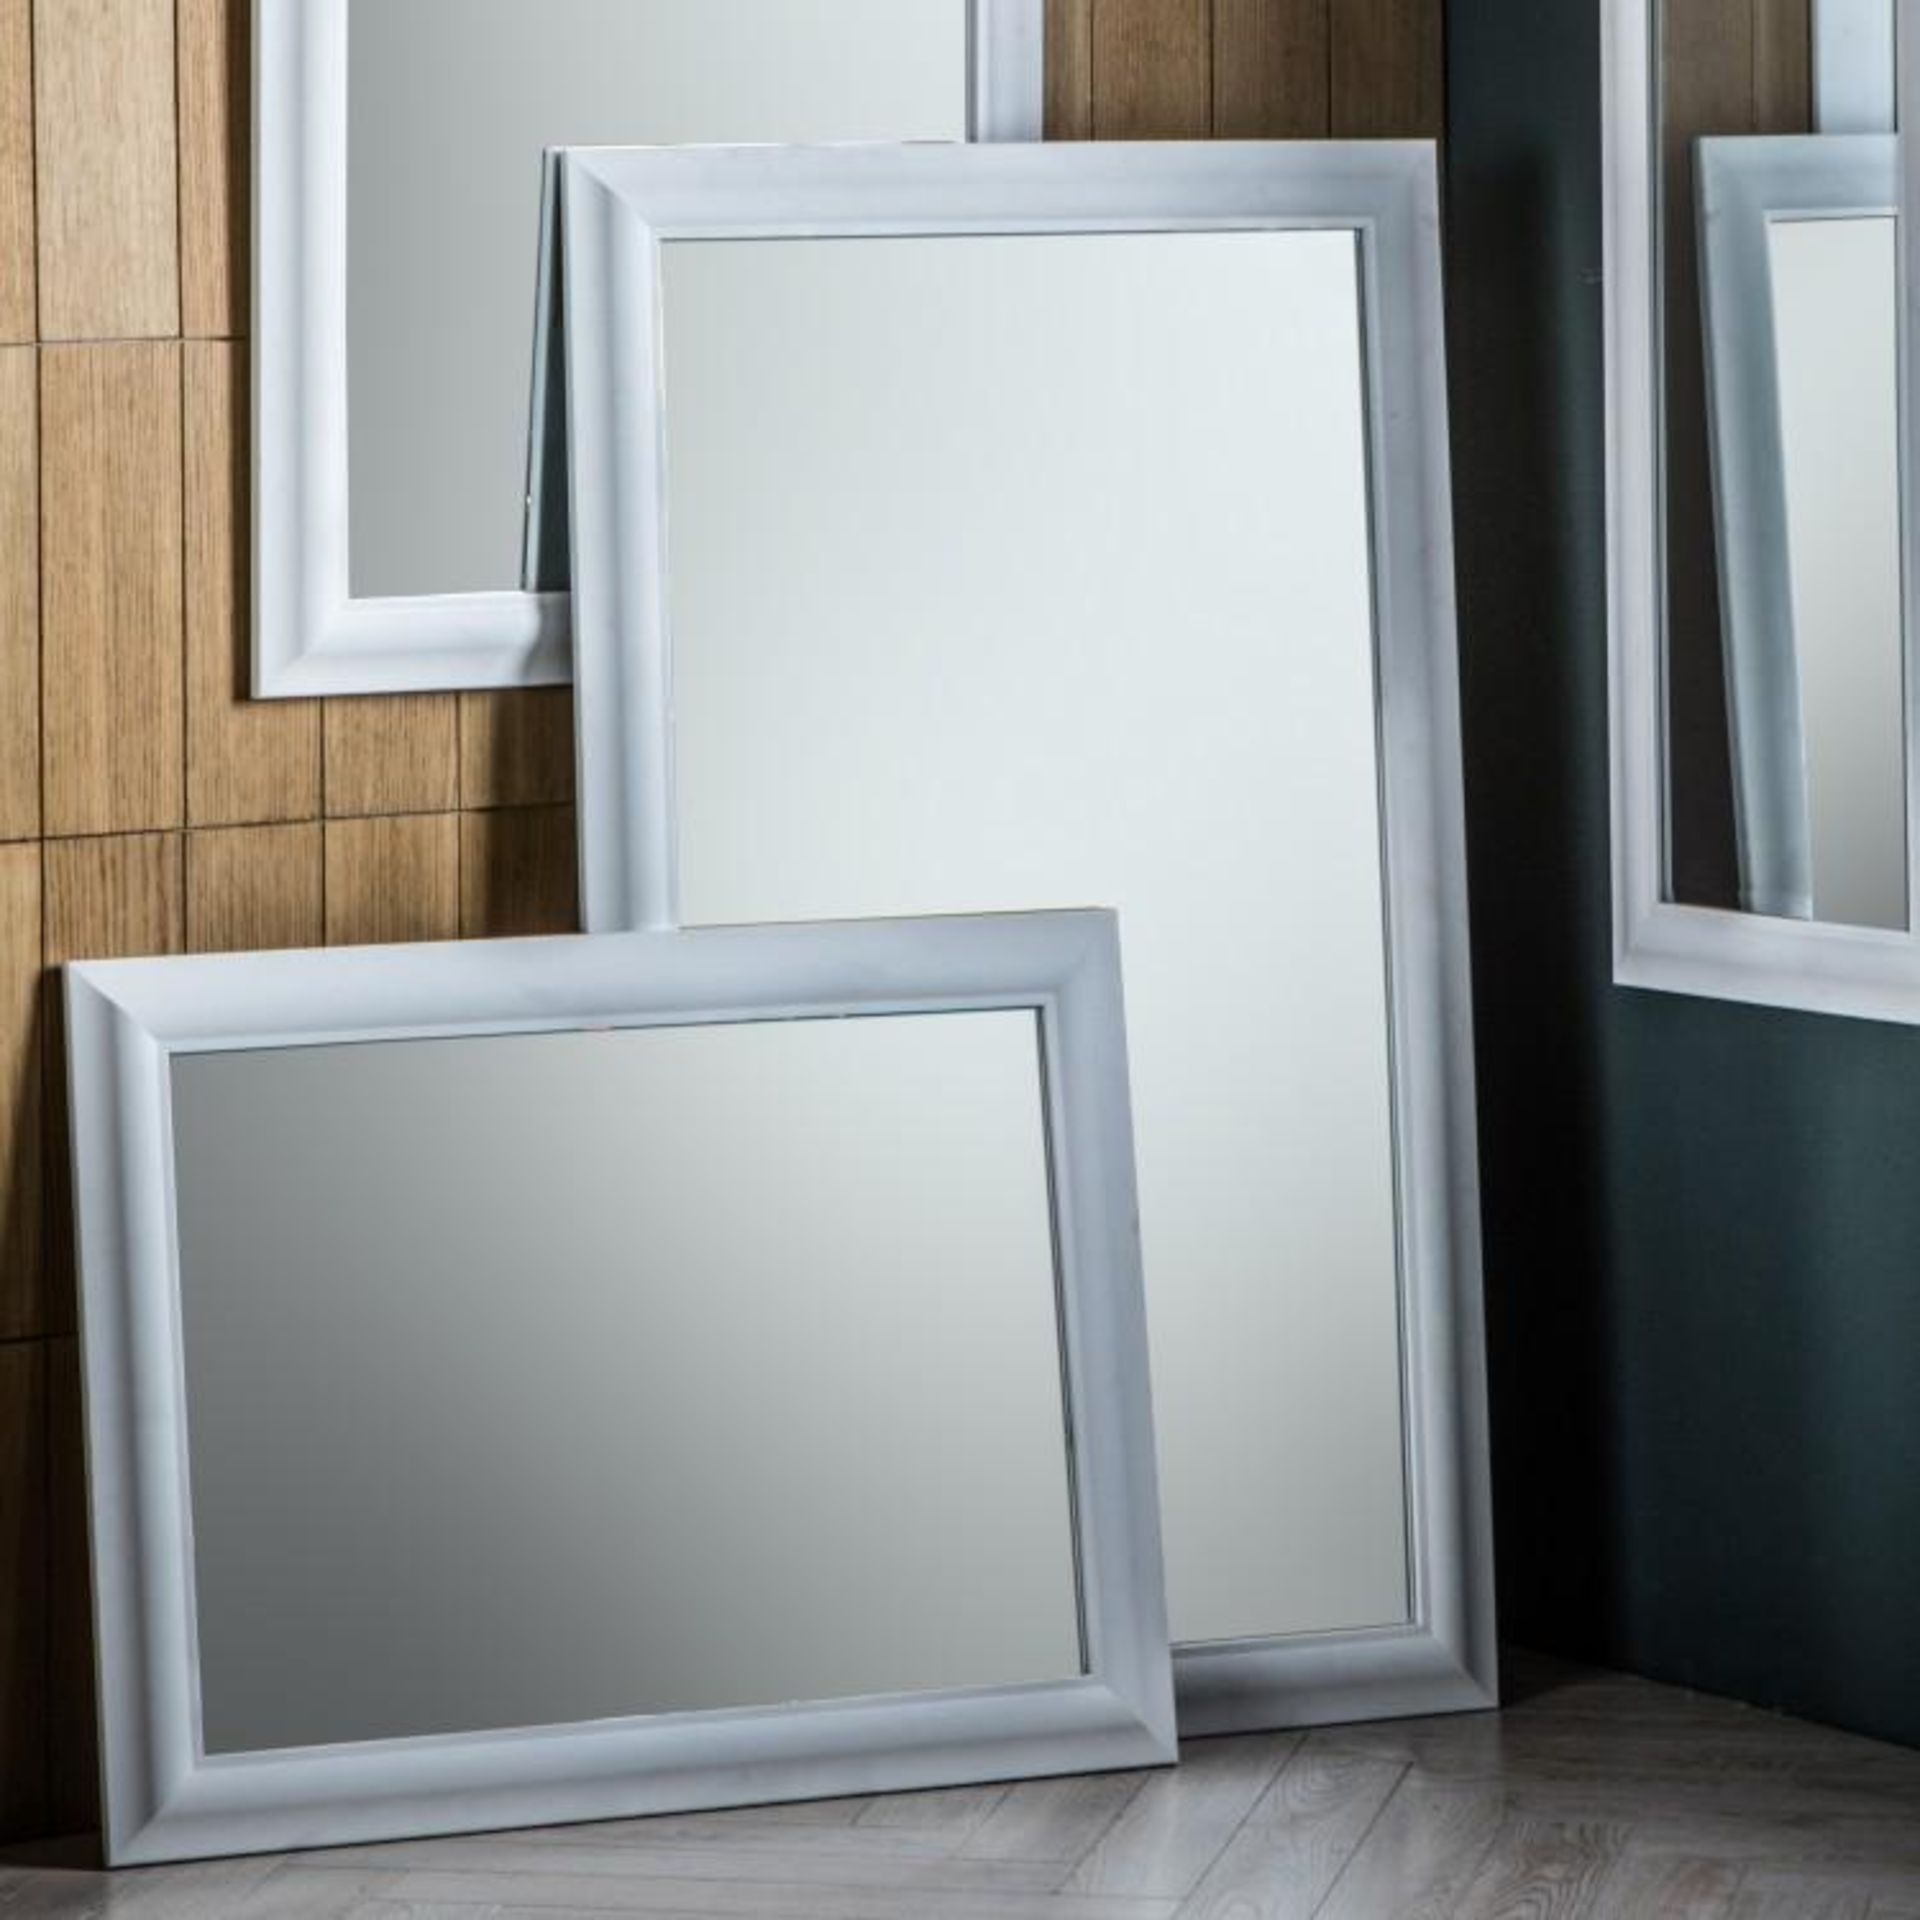 Cobain Mirror White 690 x 900mm This Cobain Mirror In White Oozes Elegance And Sophistication Hang